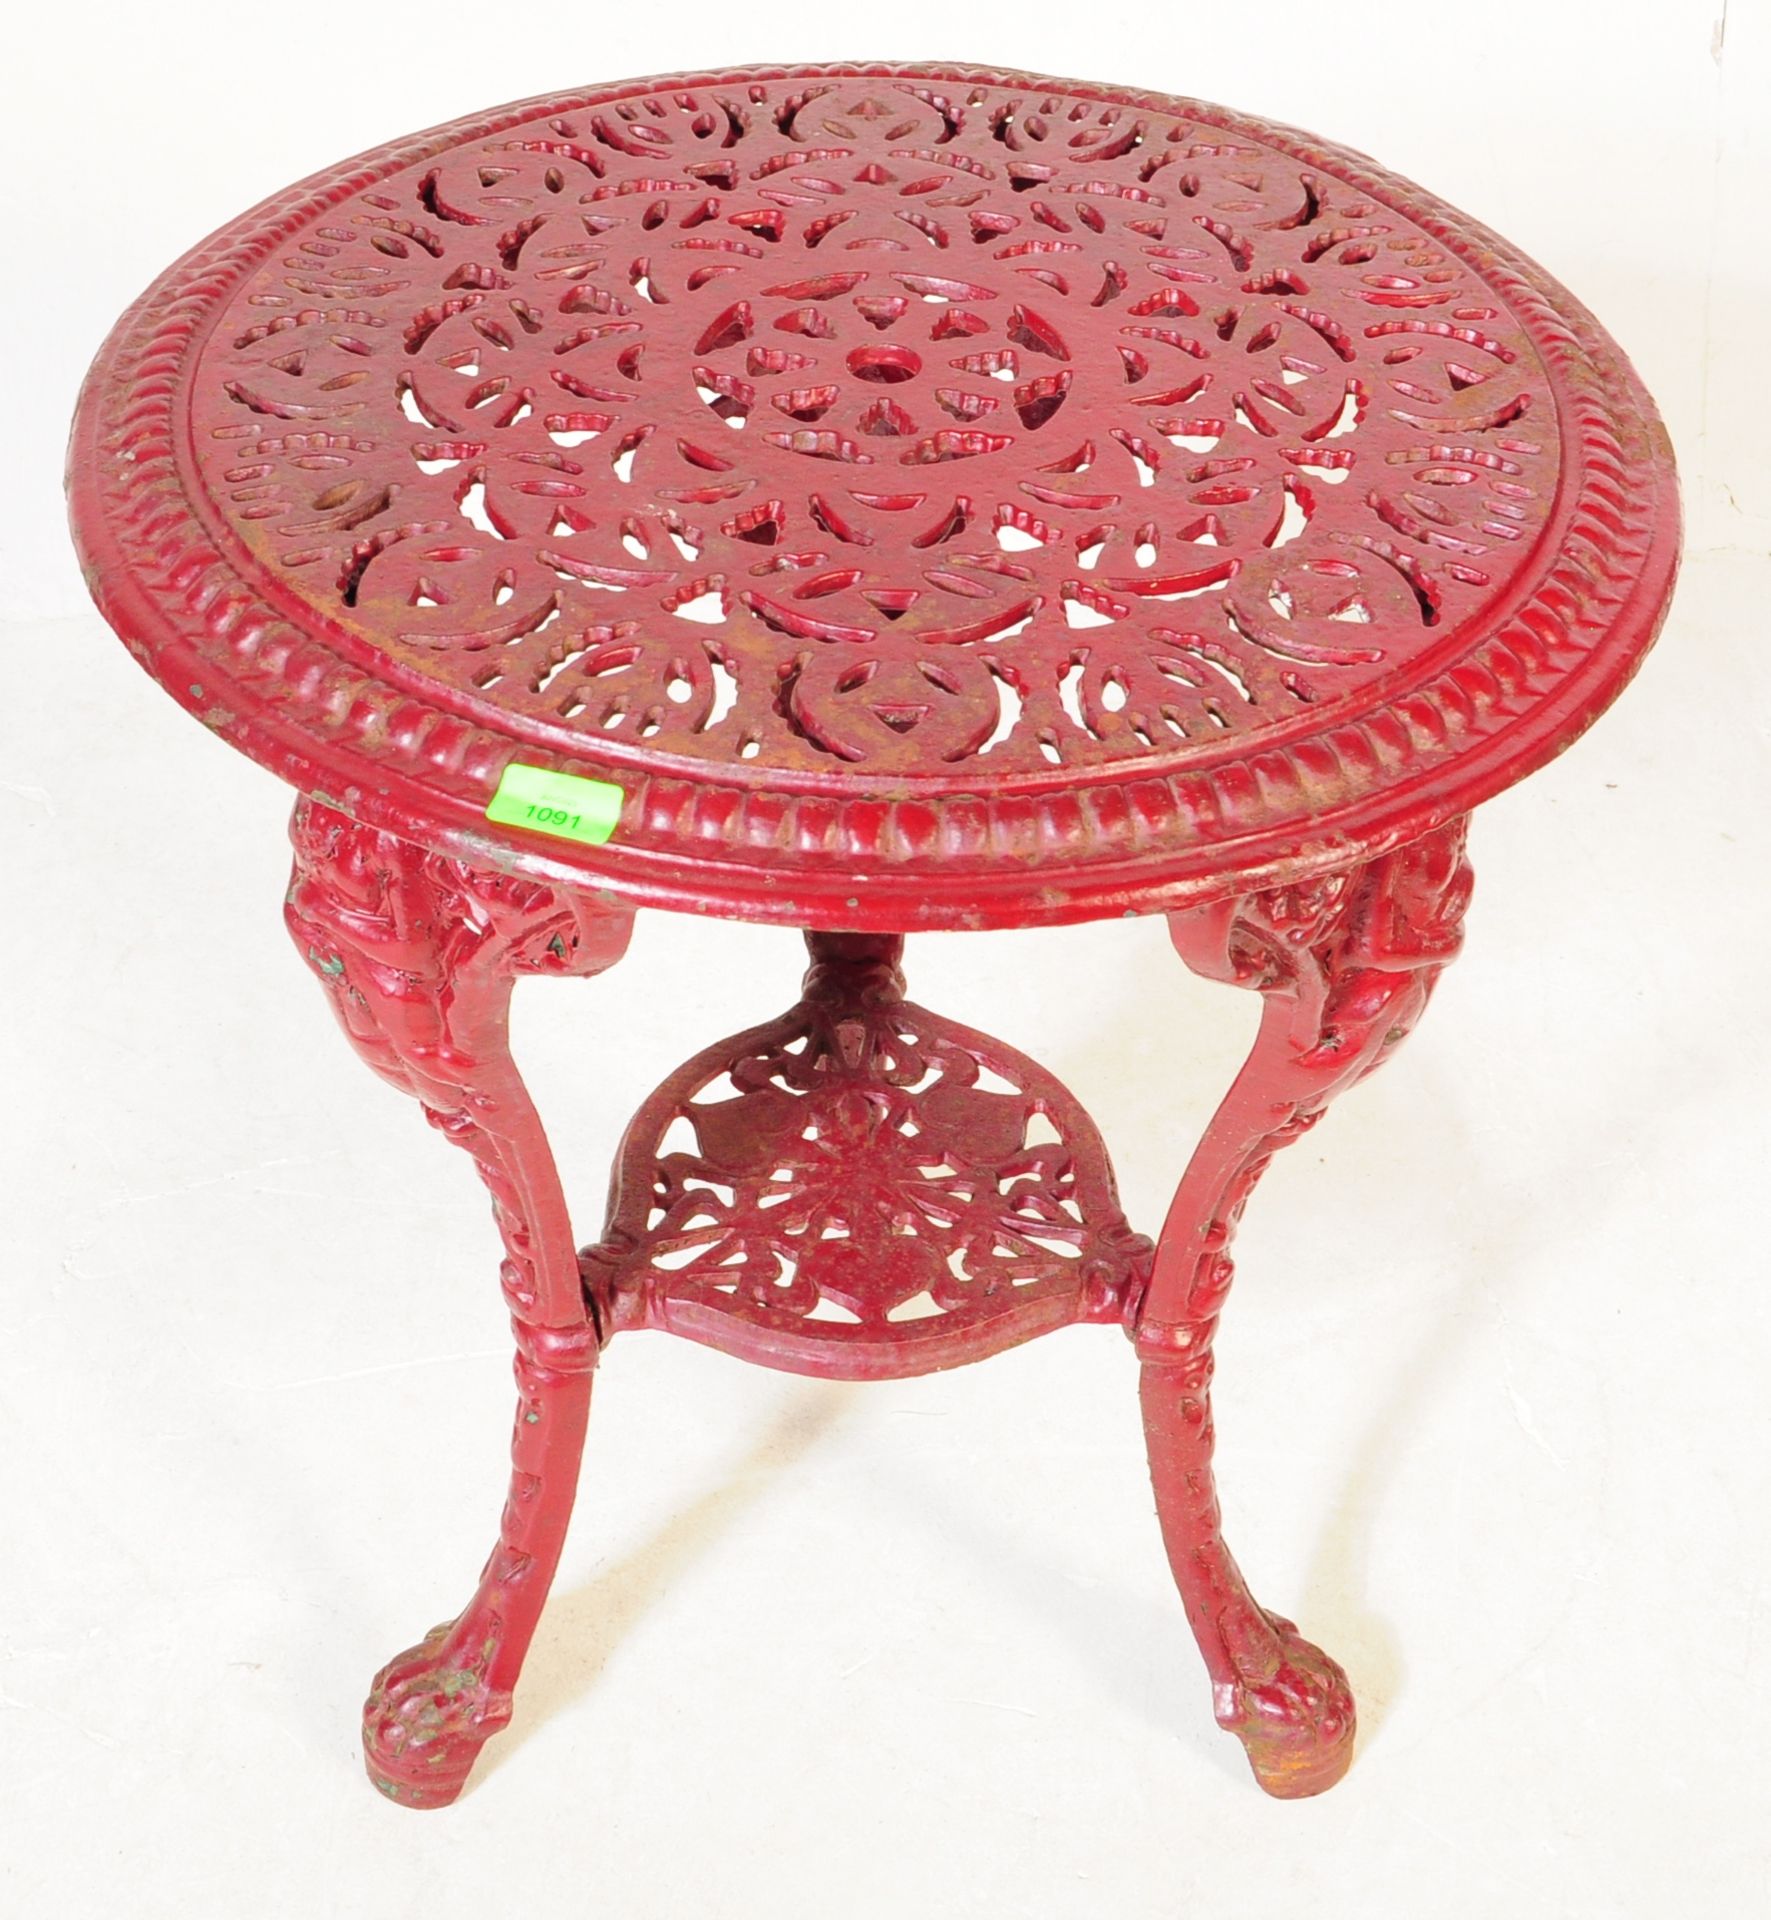 VICTORIAN PAINTED CAST IRON COALBROOKDALE STYLE GARDEN TABLE - Image 3 of 4